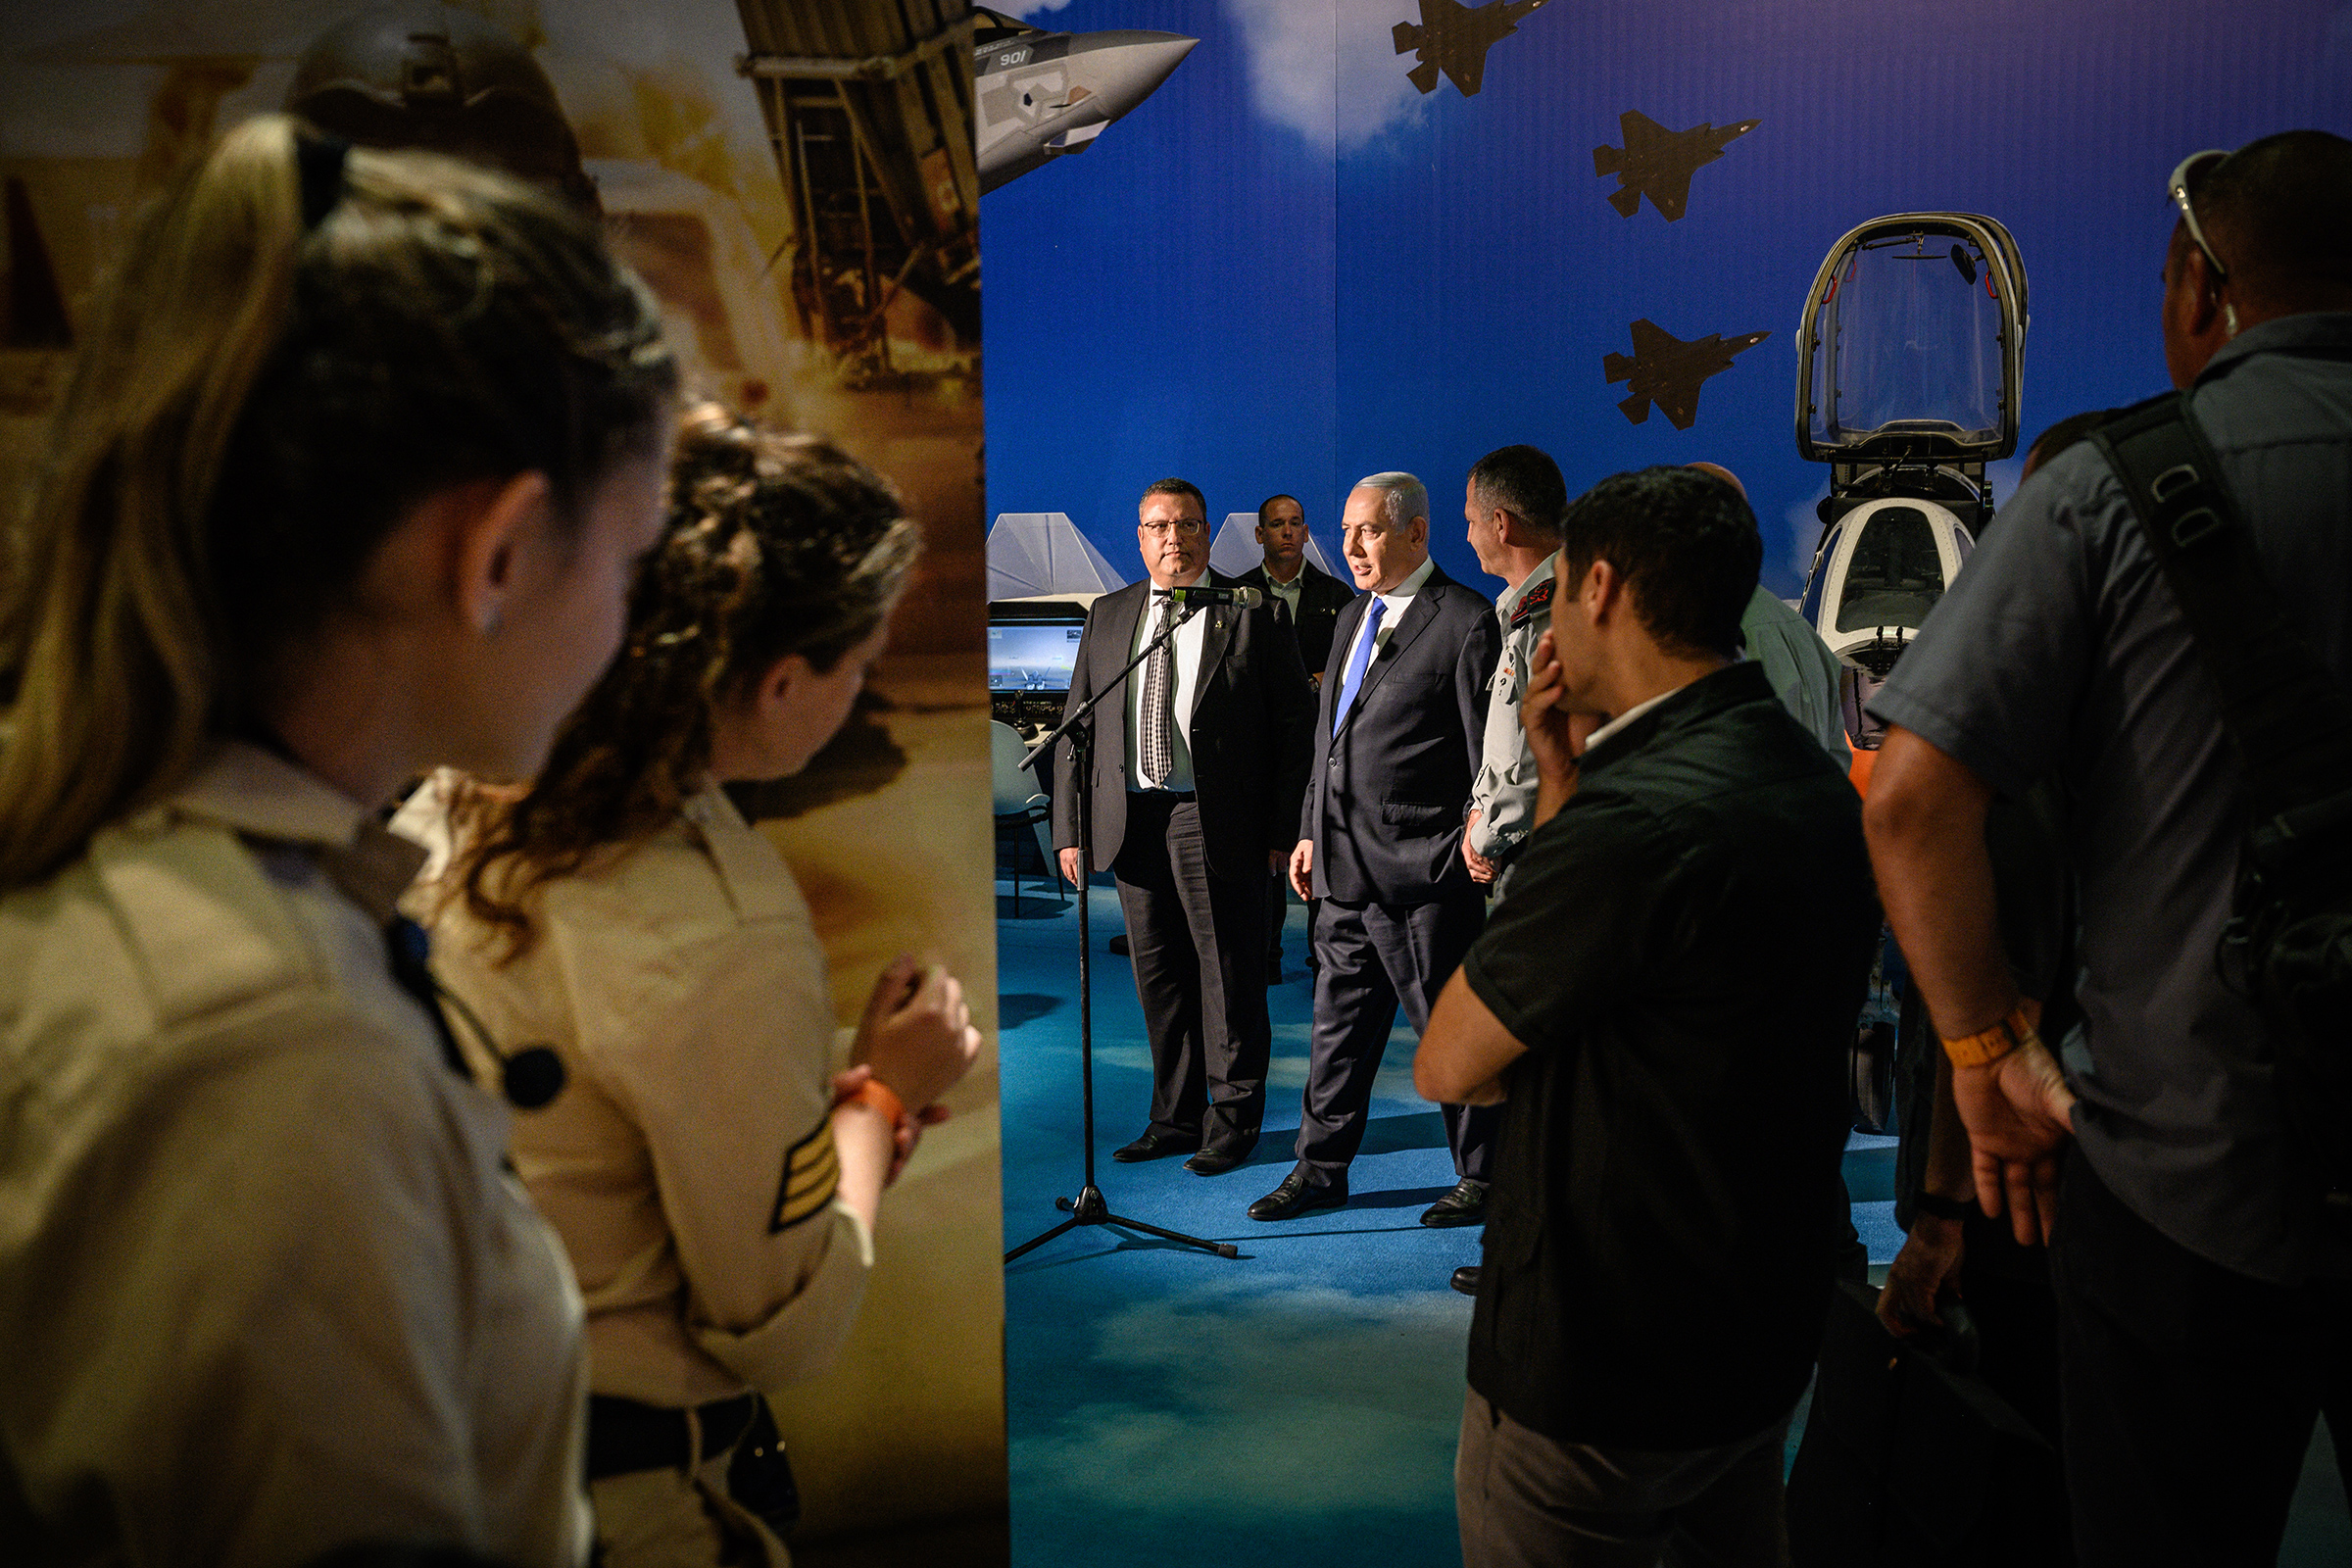 Israeli Prime Minister Benjamin Netanyahu opens an exhibit on the Israel Defense Forces, a driver behind the nation’s booming tech sector, in Jerusalem on June 25. July 22 issue. (Yuri Kozyrev—NOOR for TIME)